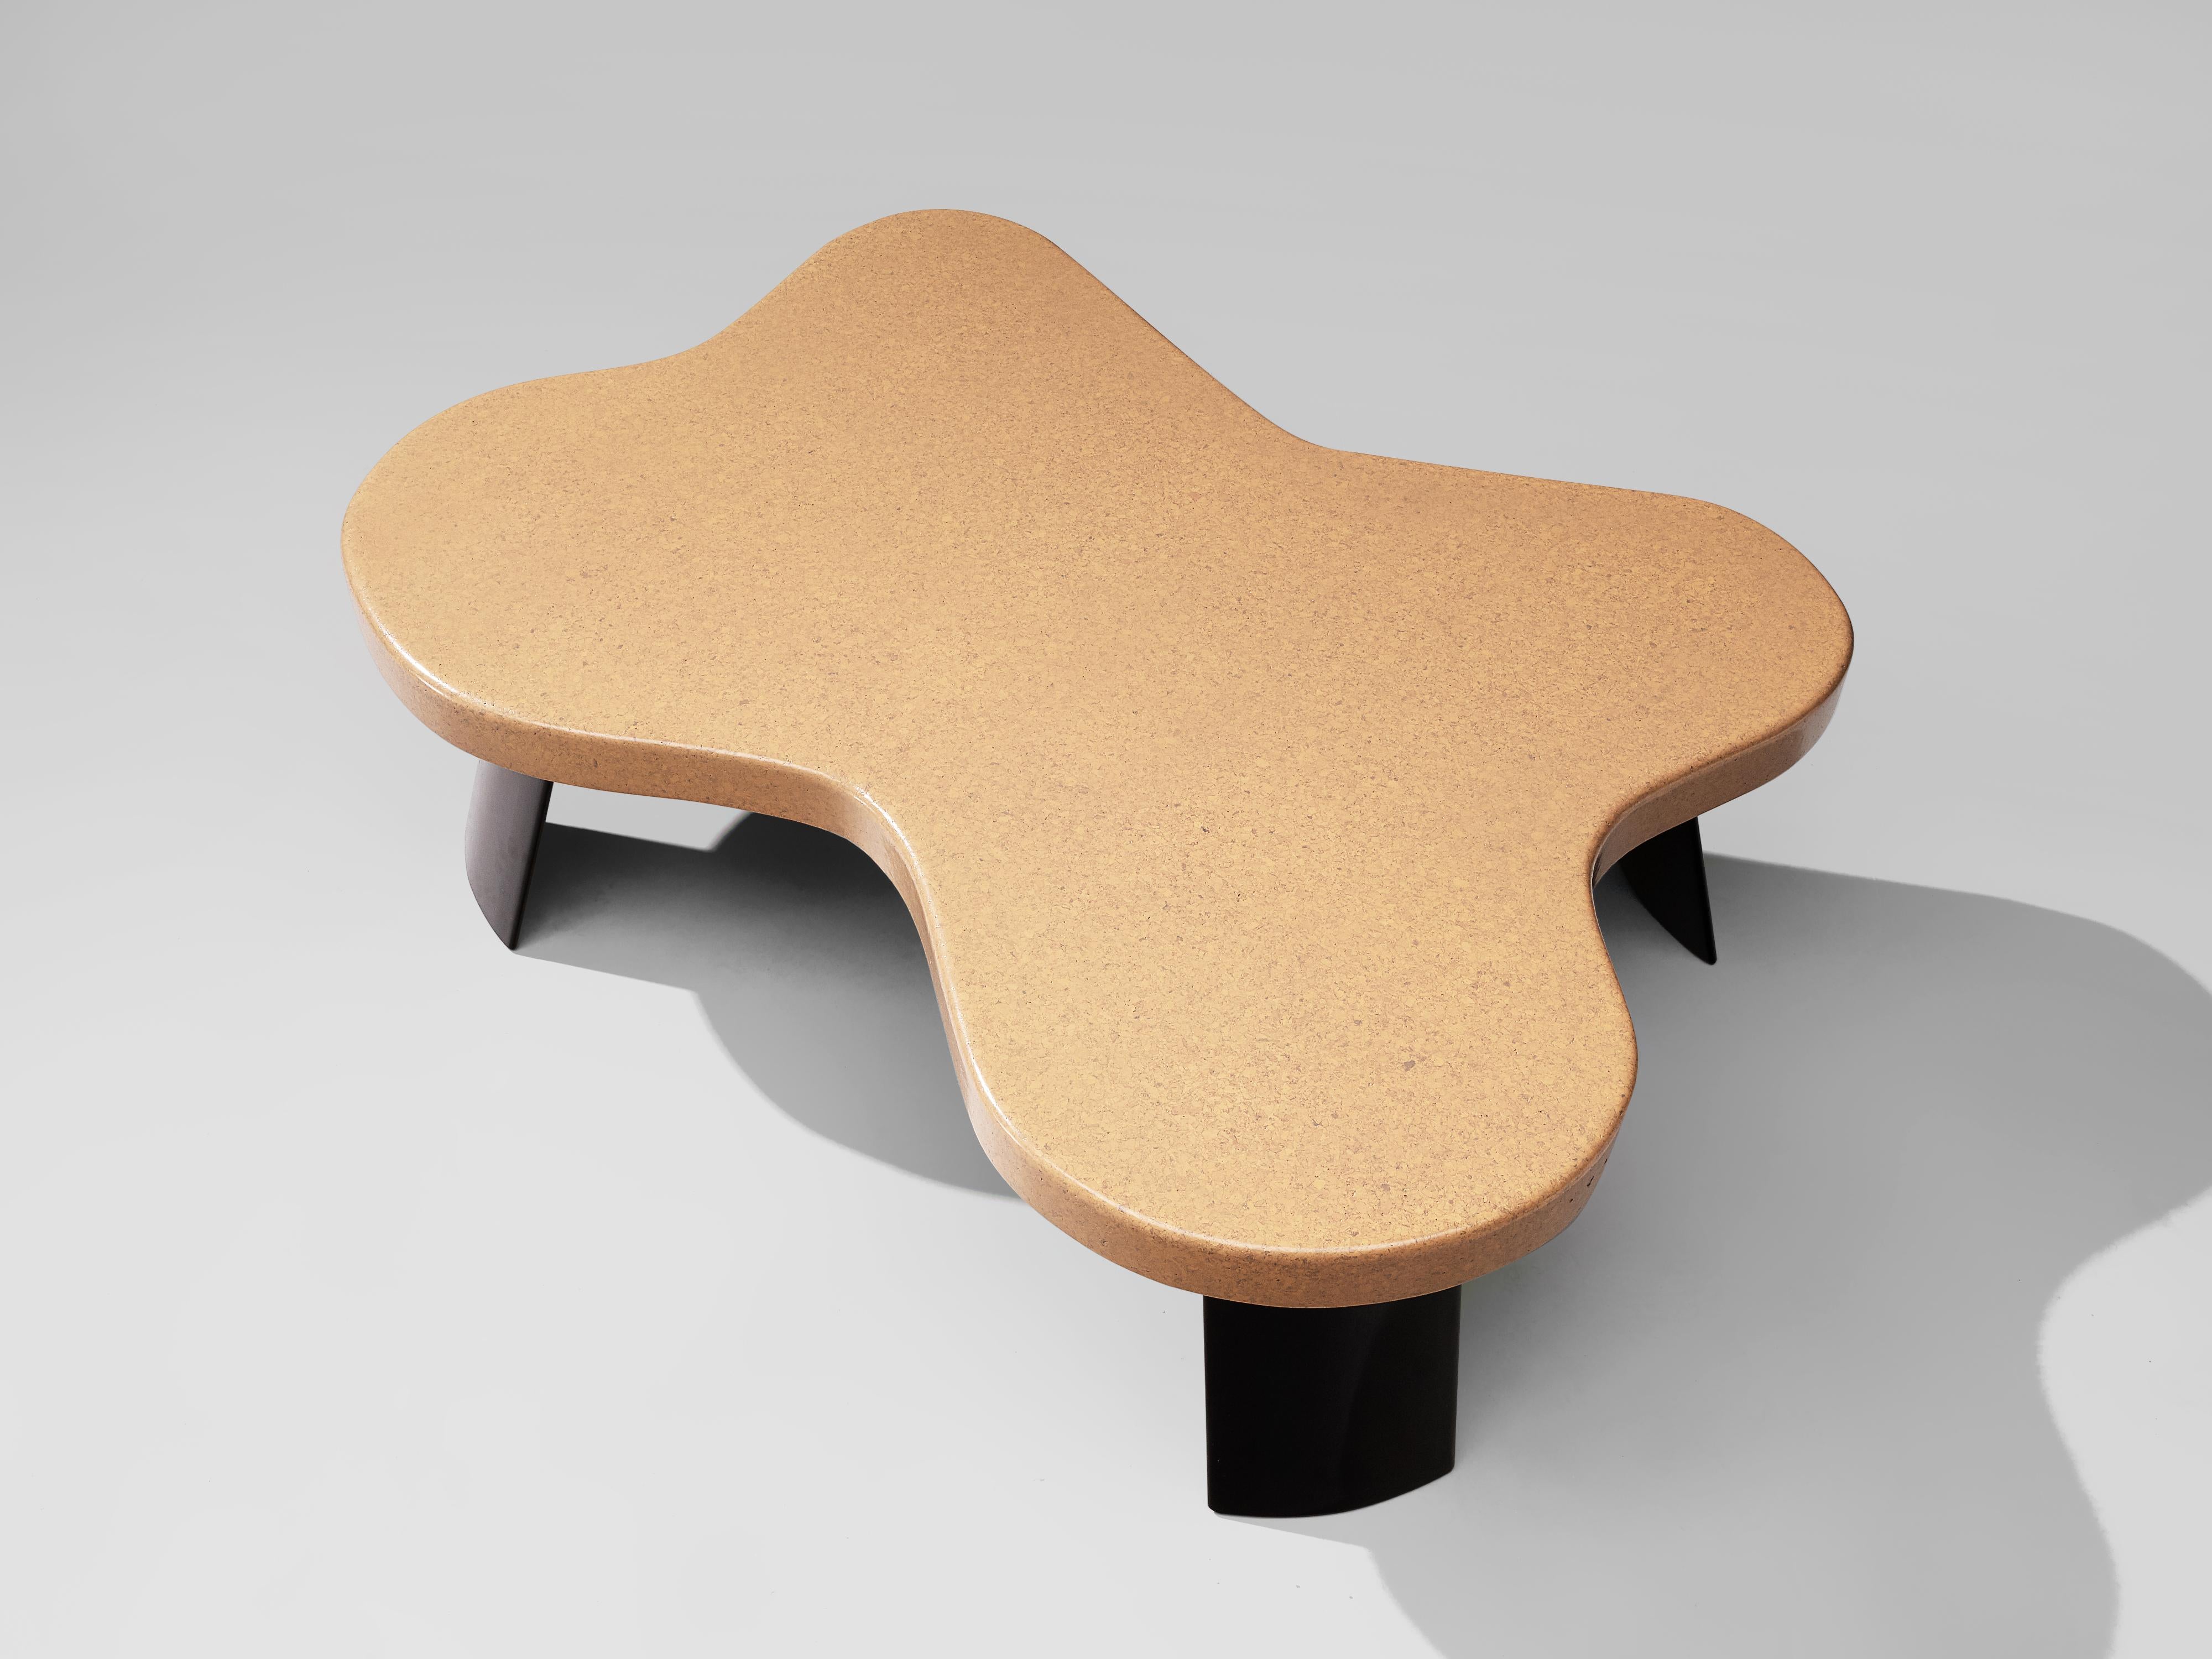 Paul Frankl for Johnson Furniture, coffee table, model 'No 5005', lacquered cork, mahogany, USA, 1950s.

This biomorphic shaped coffee table designed by Paul Frankl has a cork laminated tabletop. The bright tone of the cloud-like designed shape